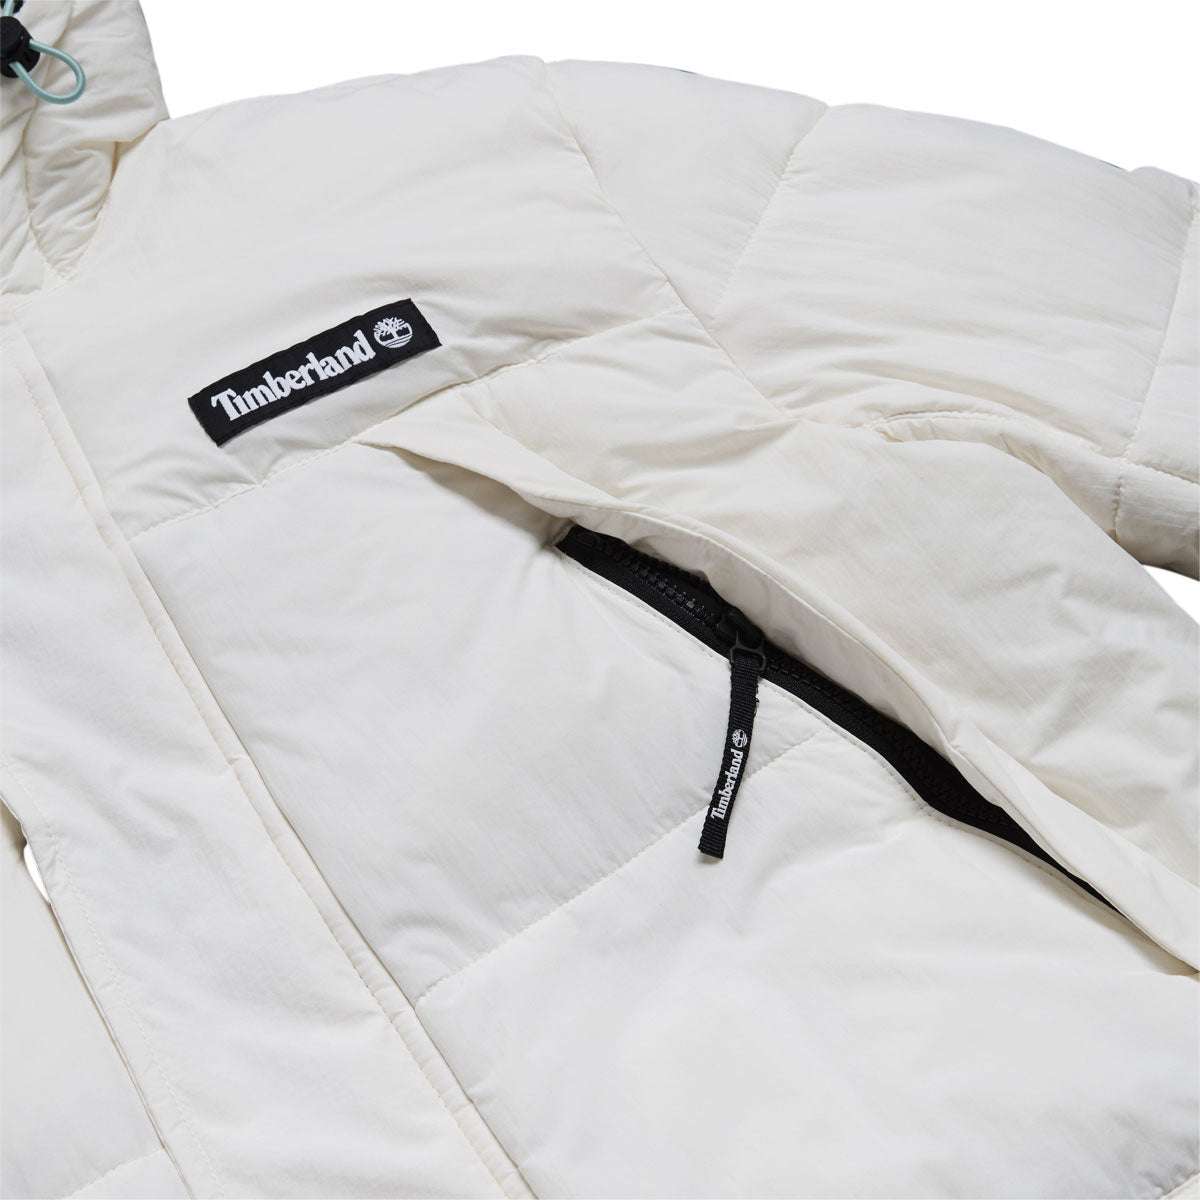 Timberland DWR Outdoor Archive Puffer Jacket - Solitary Star image 3